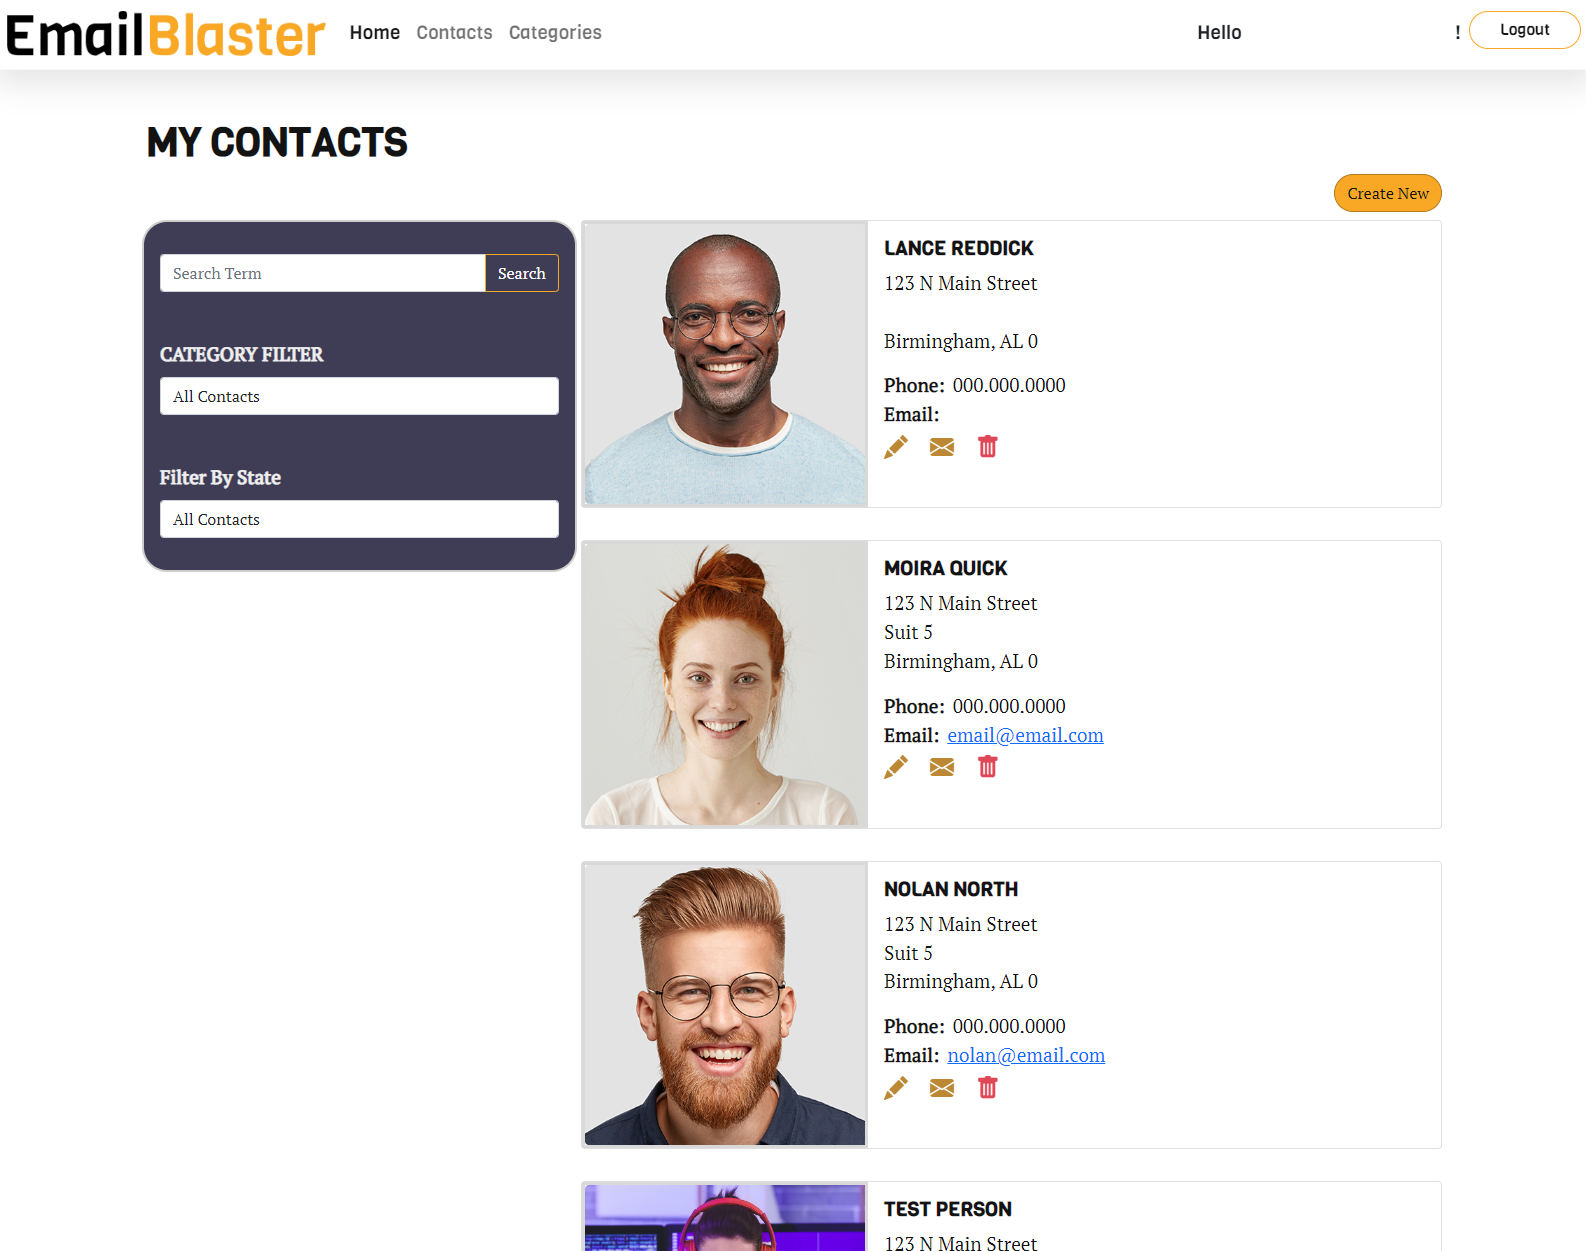 View of the contacts page.